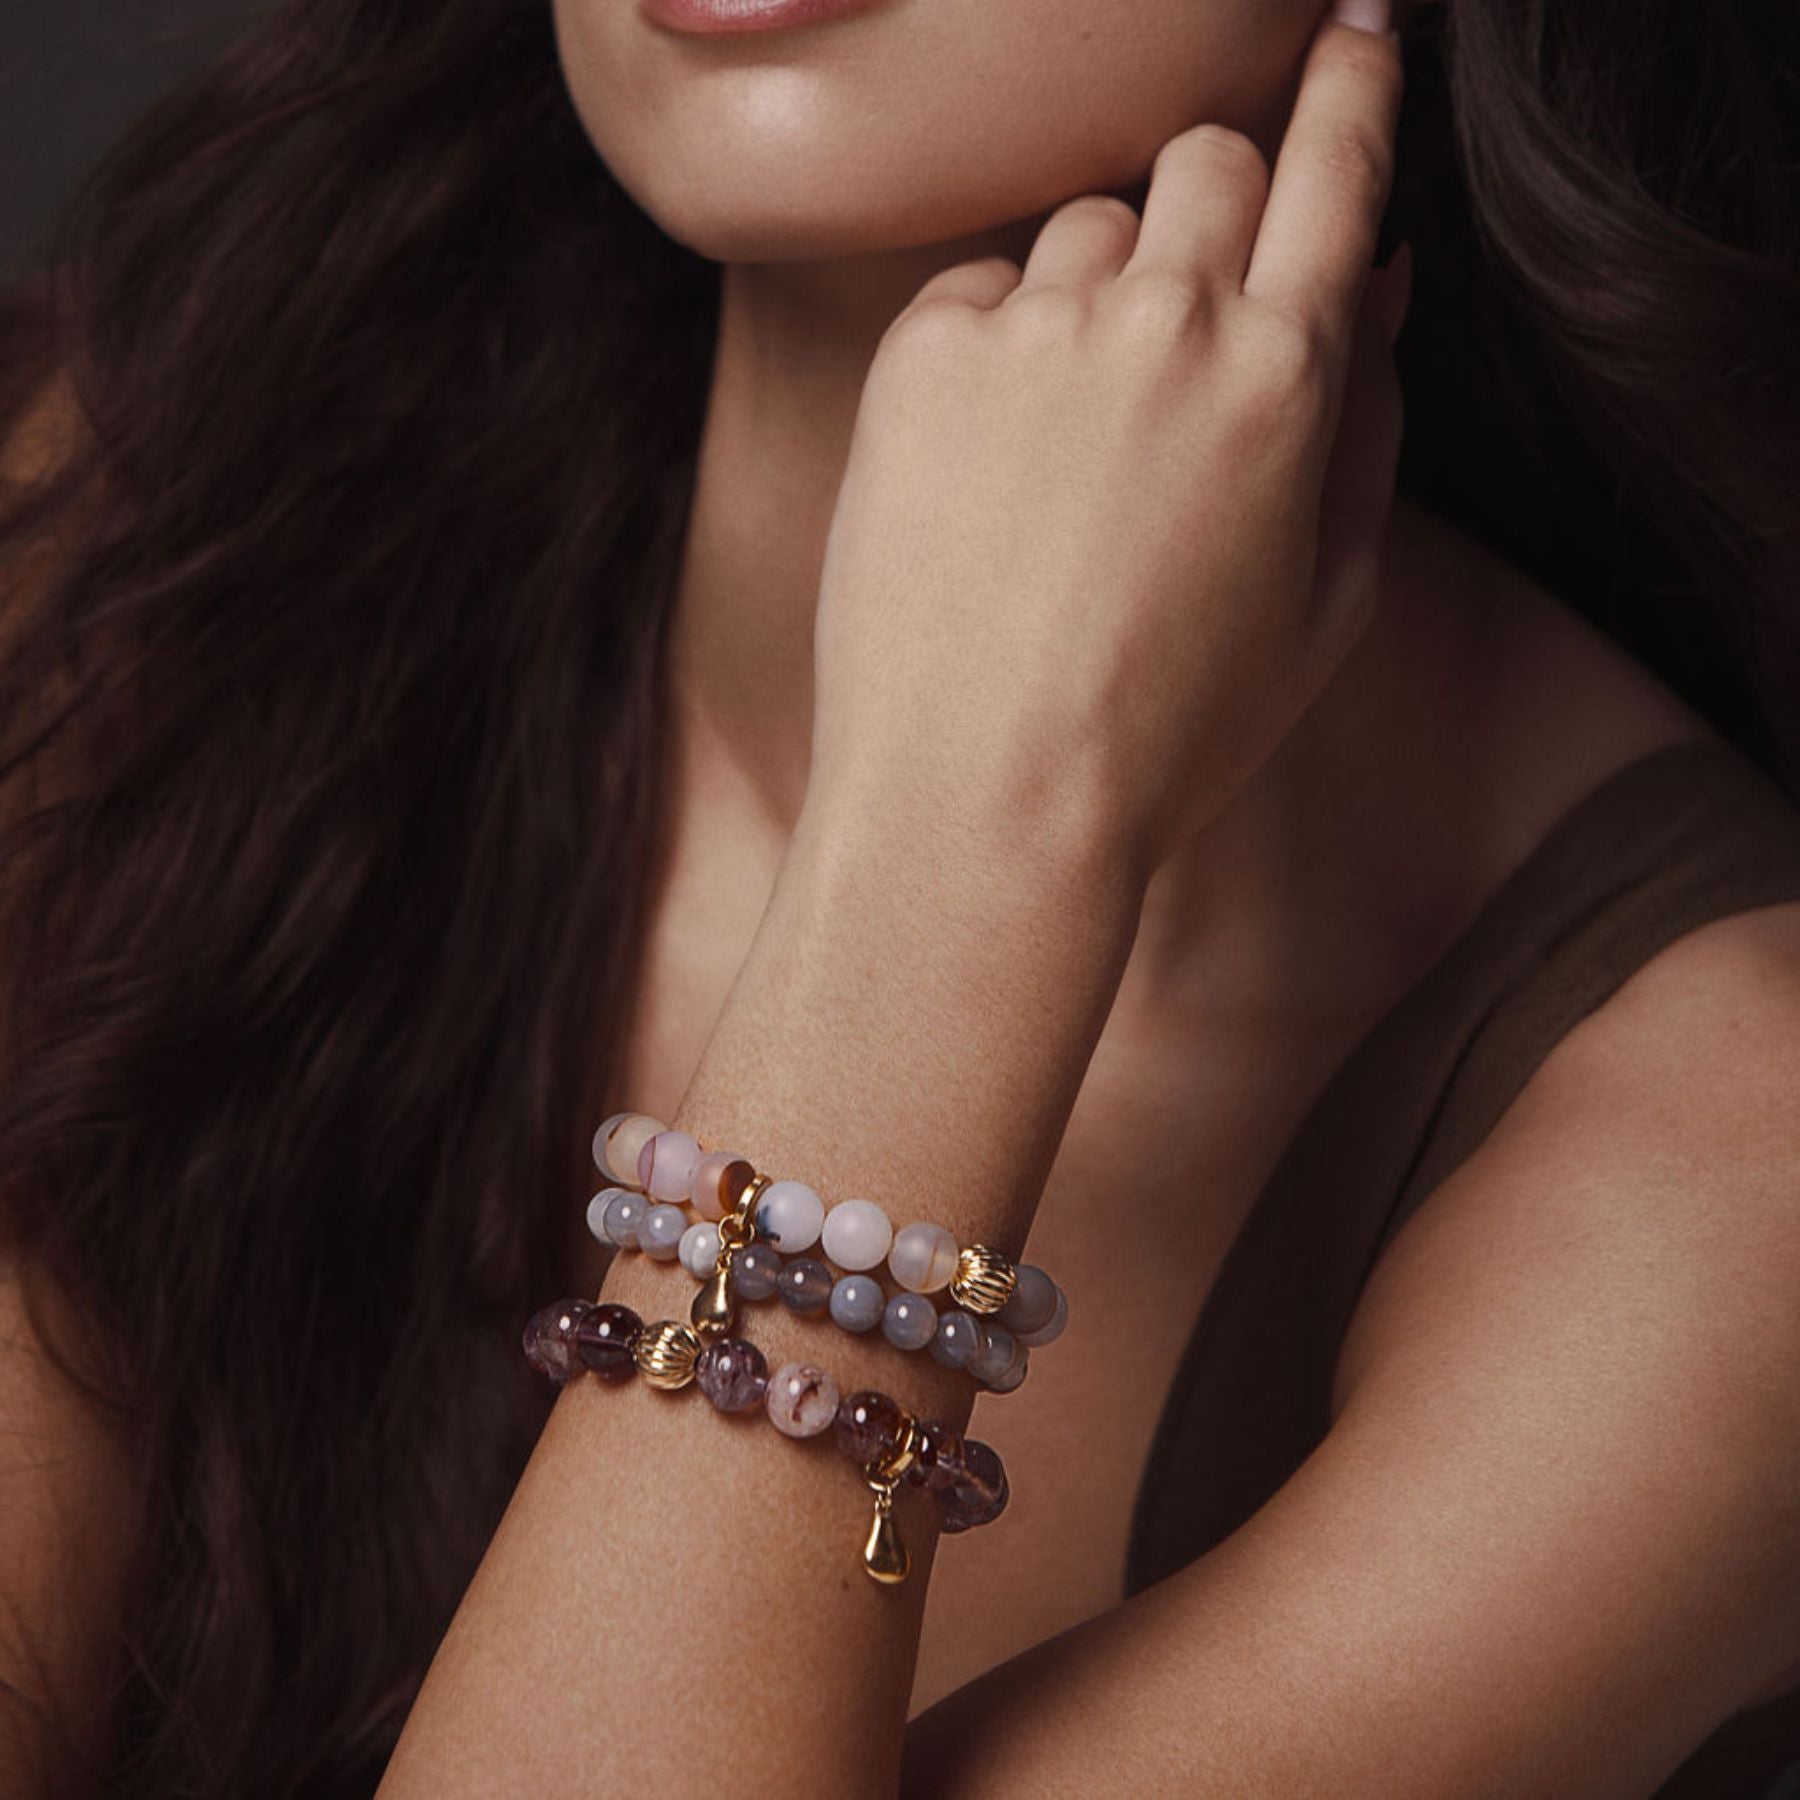 Model wearing stack of beaded bracelets in hues of purple and gray.